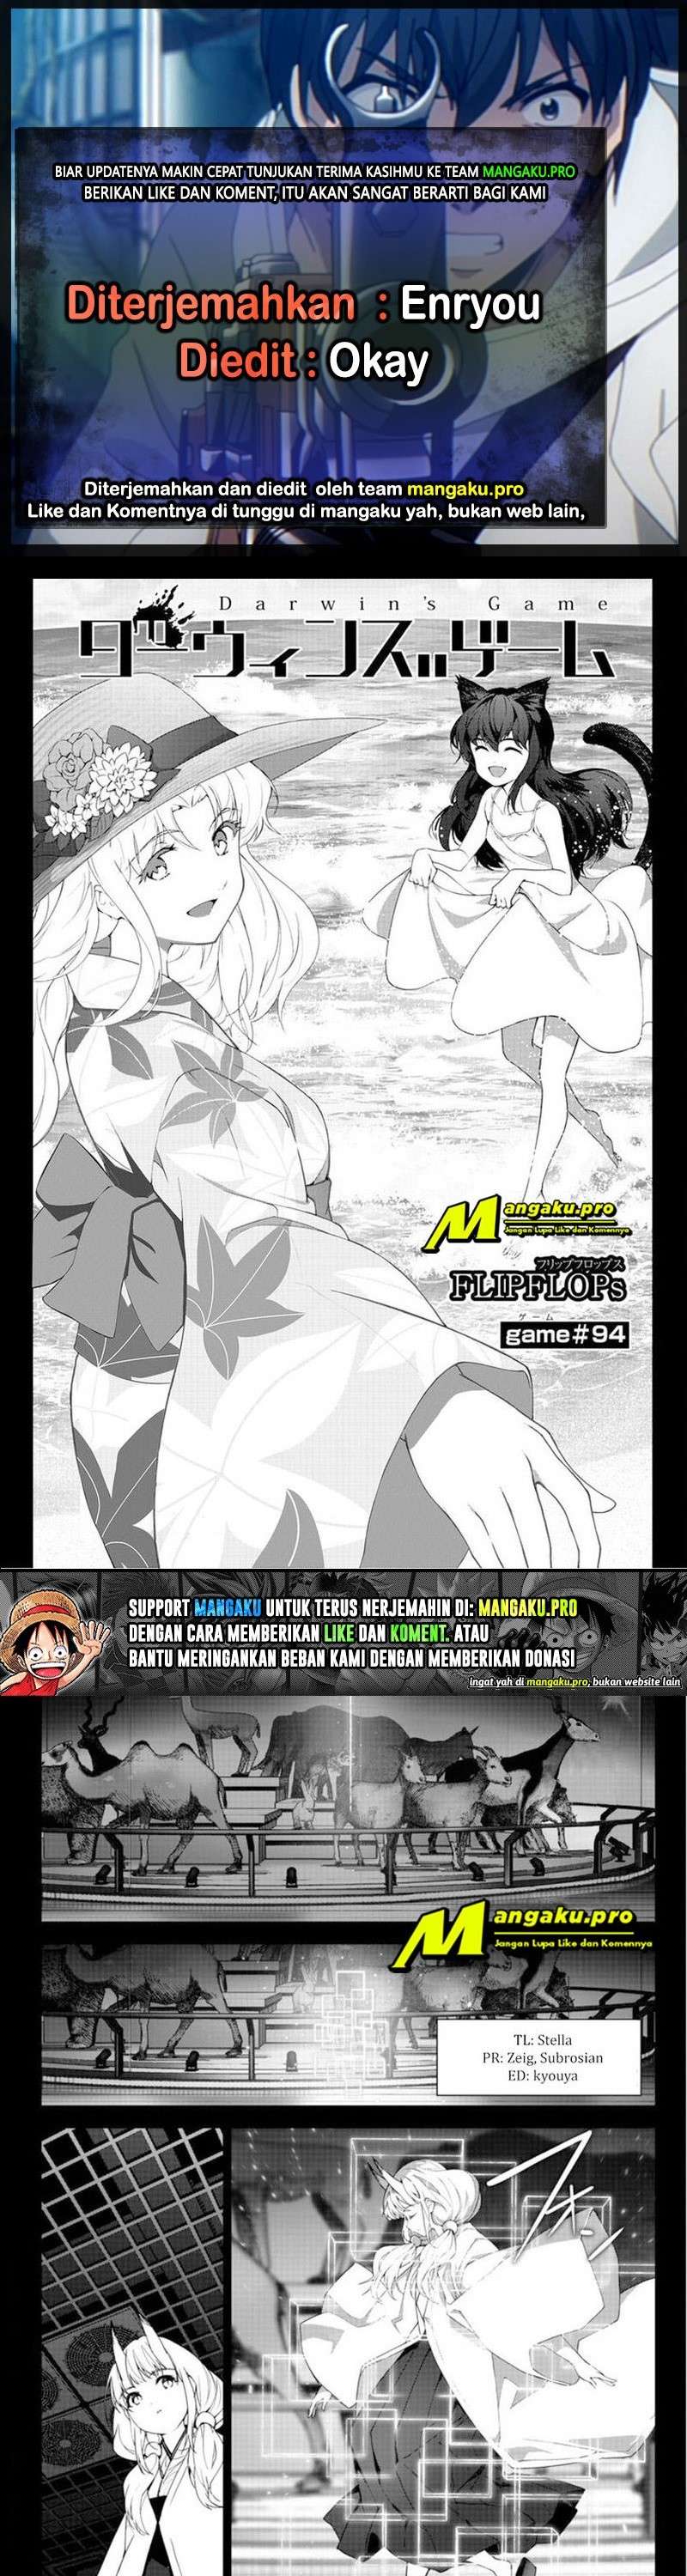 Darwin’s Game Chapter 94-1